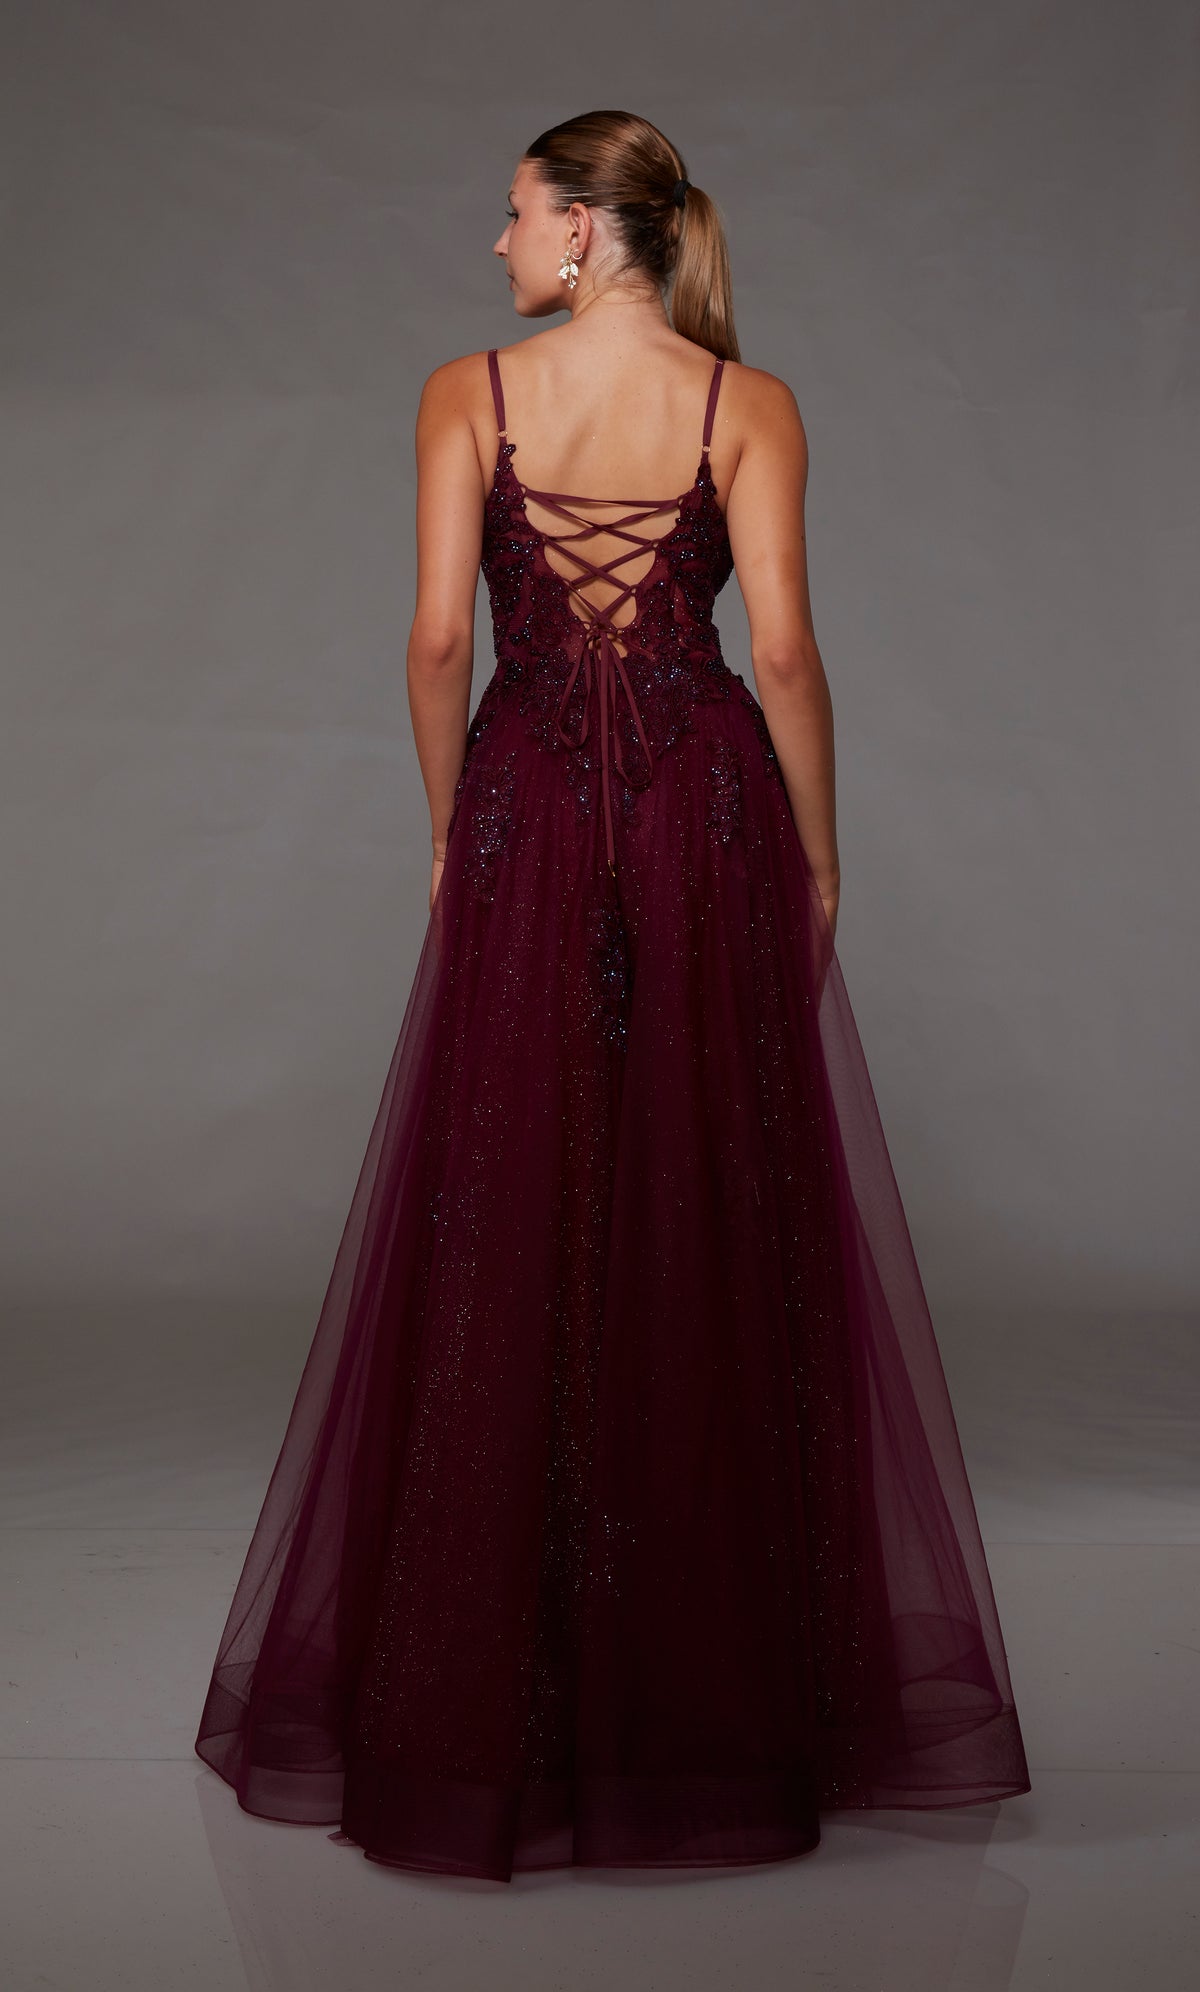 Dark red prom dress with an A-line silhouette, plunging neckline, beaded floral lace appliques, and an lace up back closure for the perfect fit!